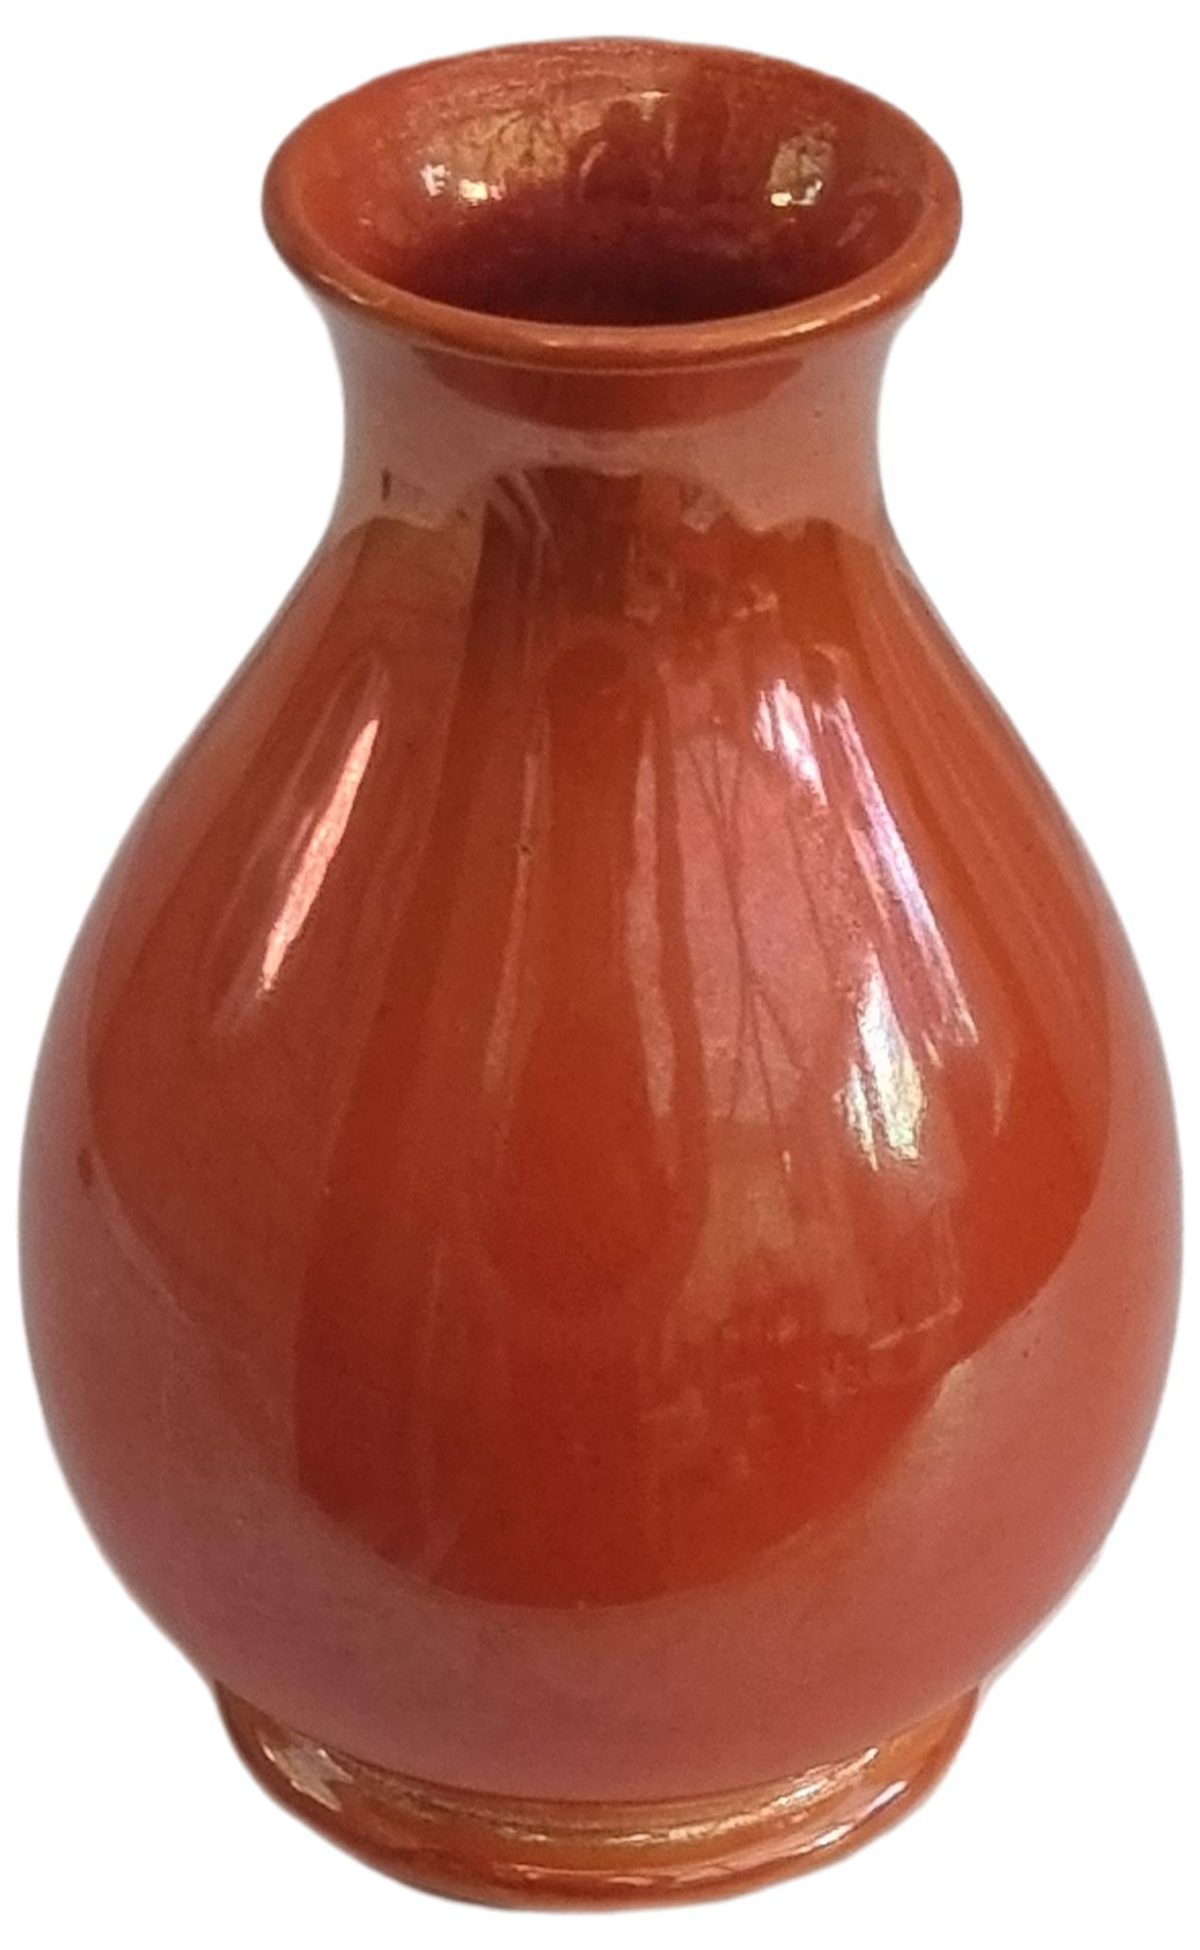 A Moorcroft lustre vase in vibrant orange circa 1907-26 the small baluster shape vase is a rare find. Main photo showing one area of vase from an eye level angle